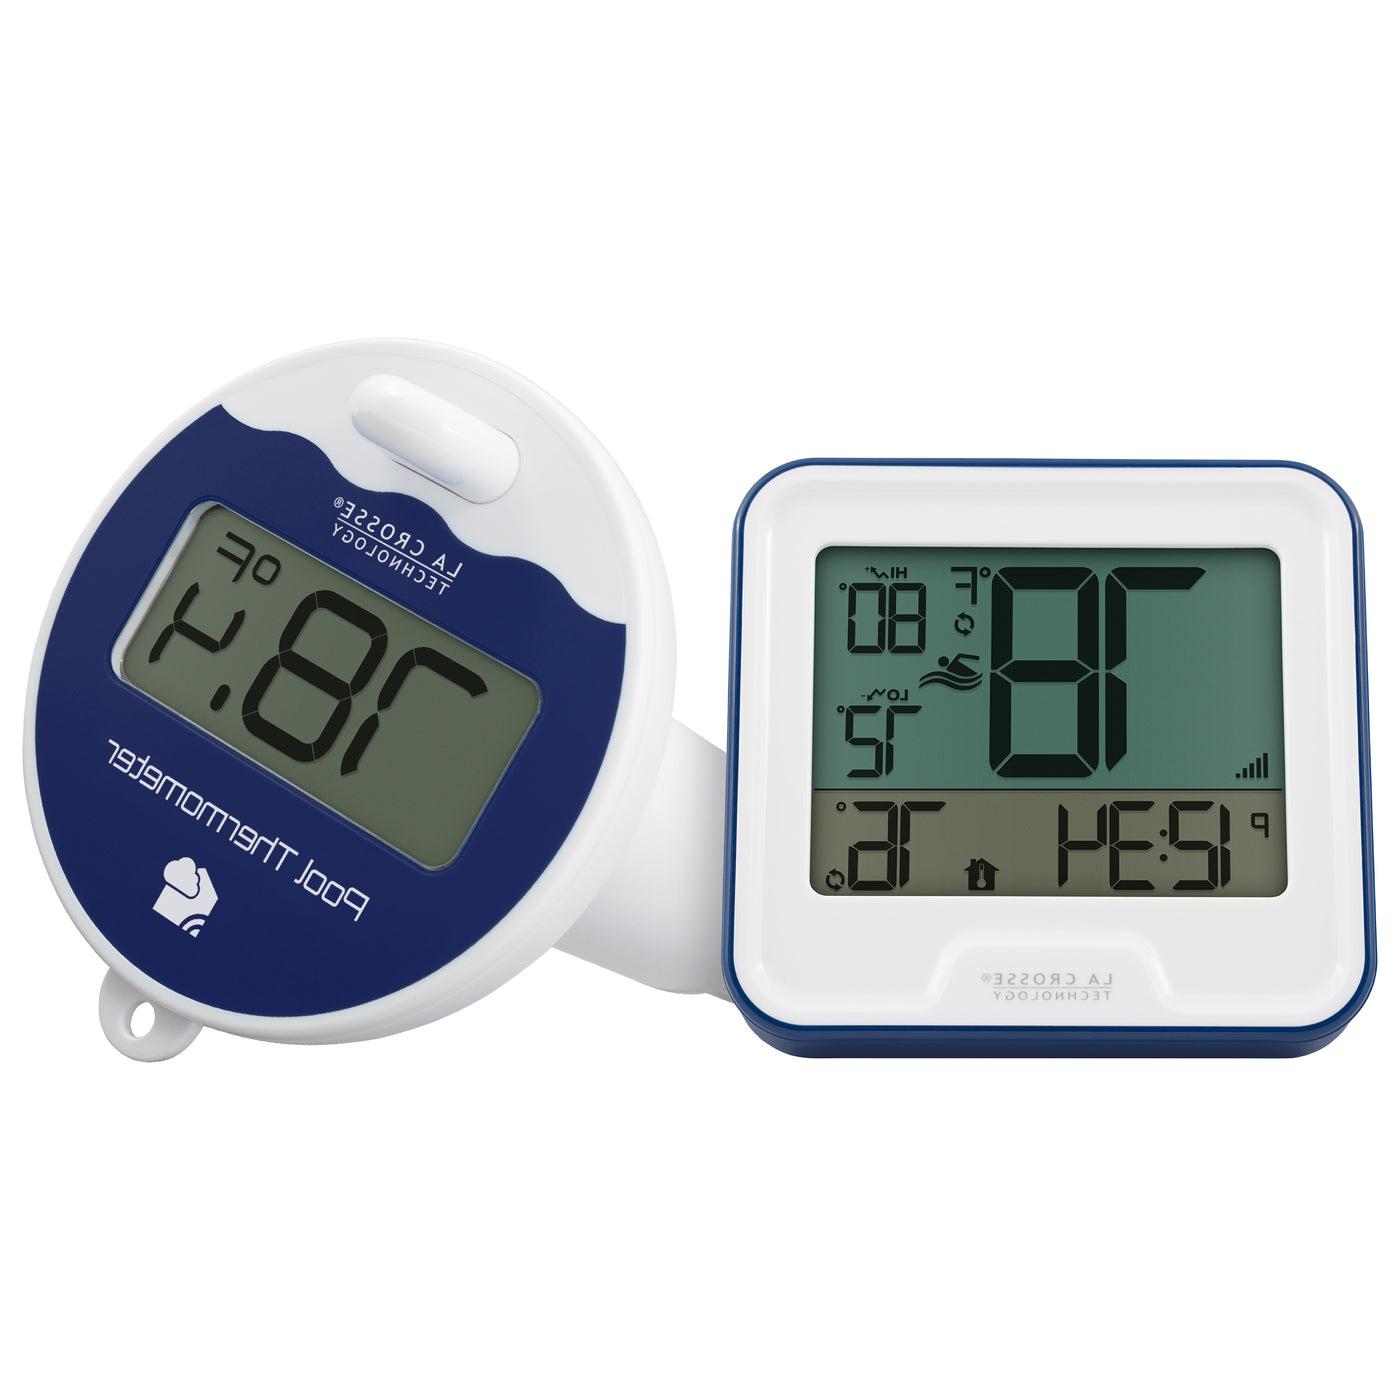 331-09667V2 Wireless Pool Thermometer